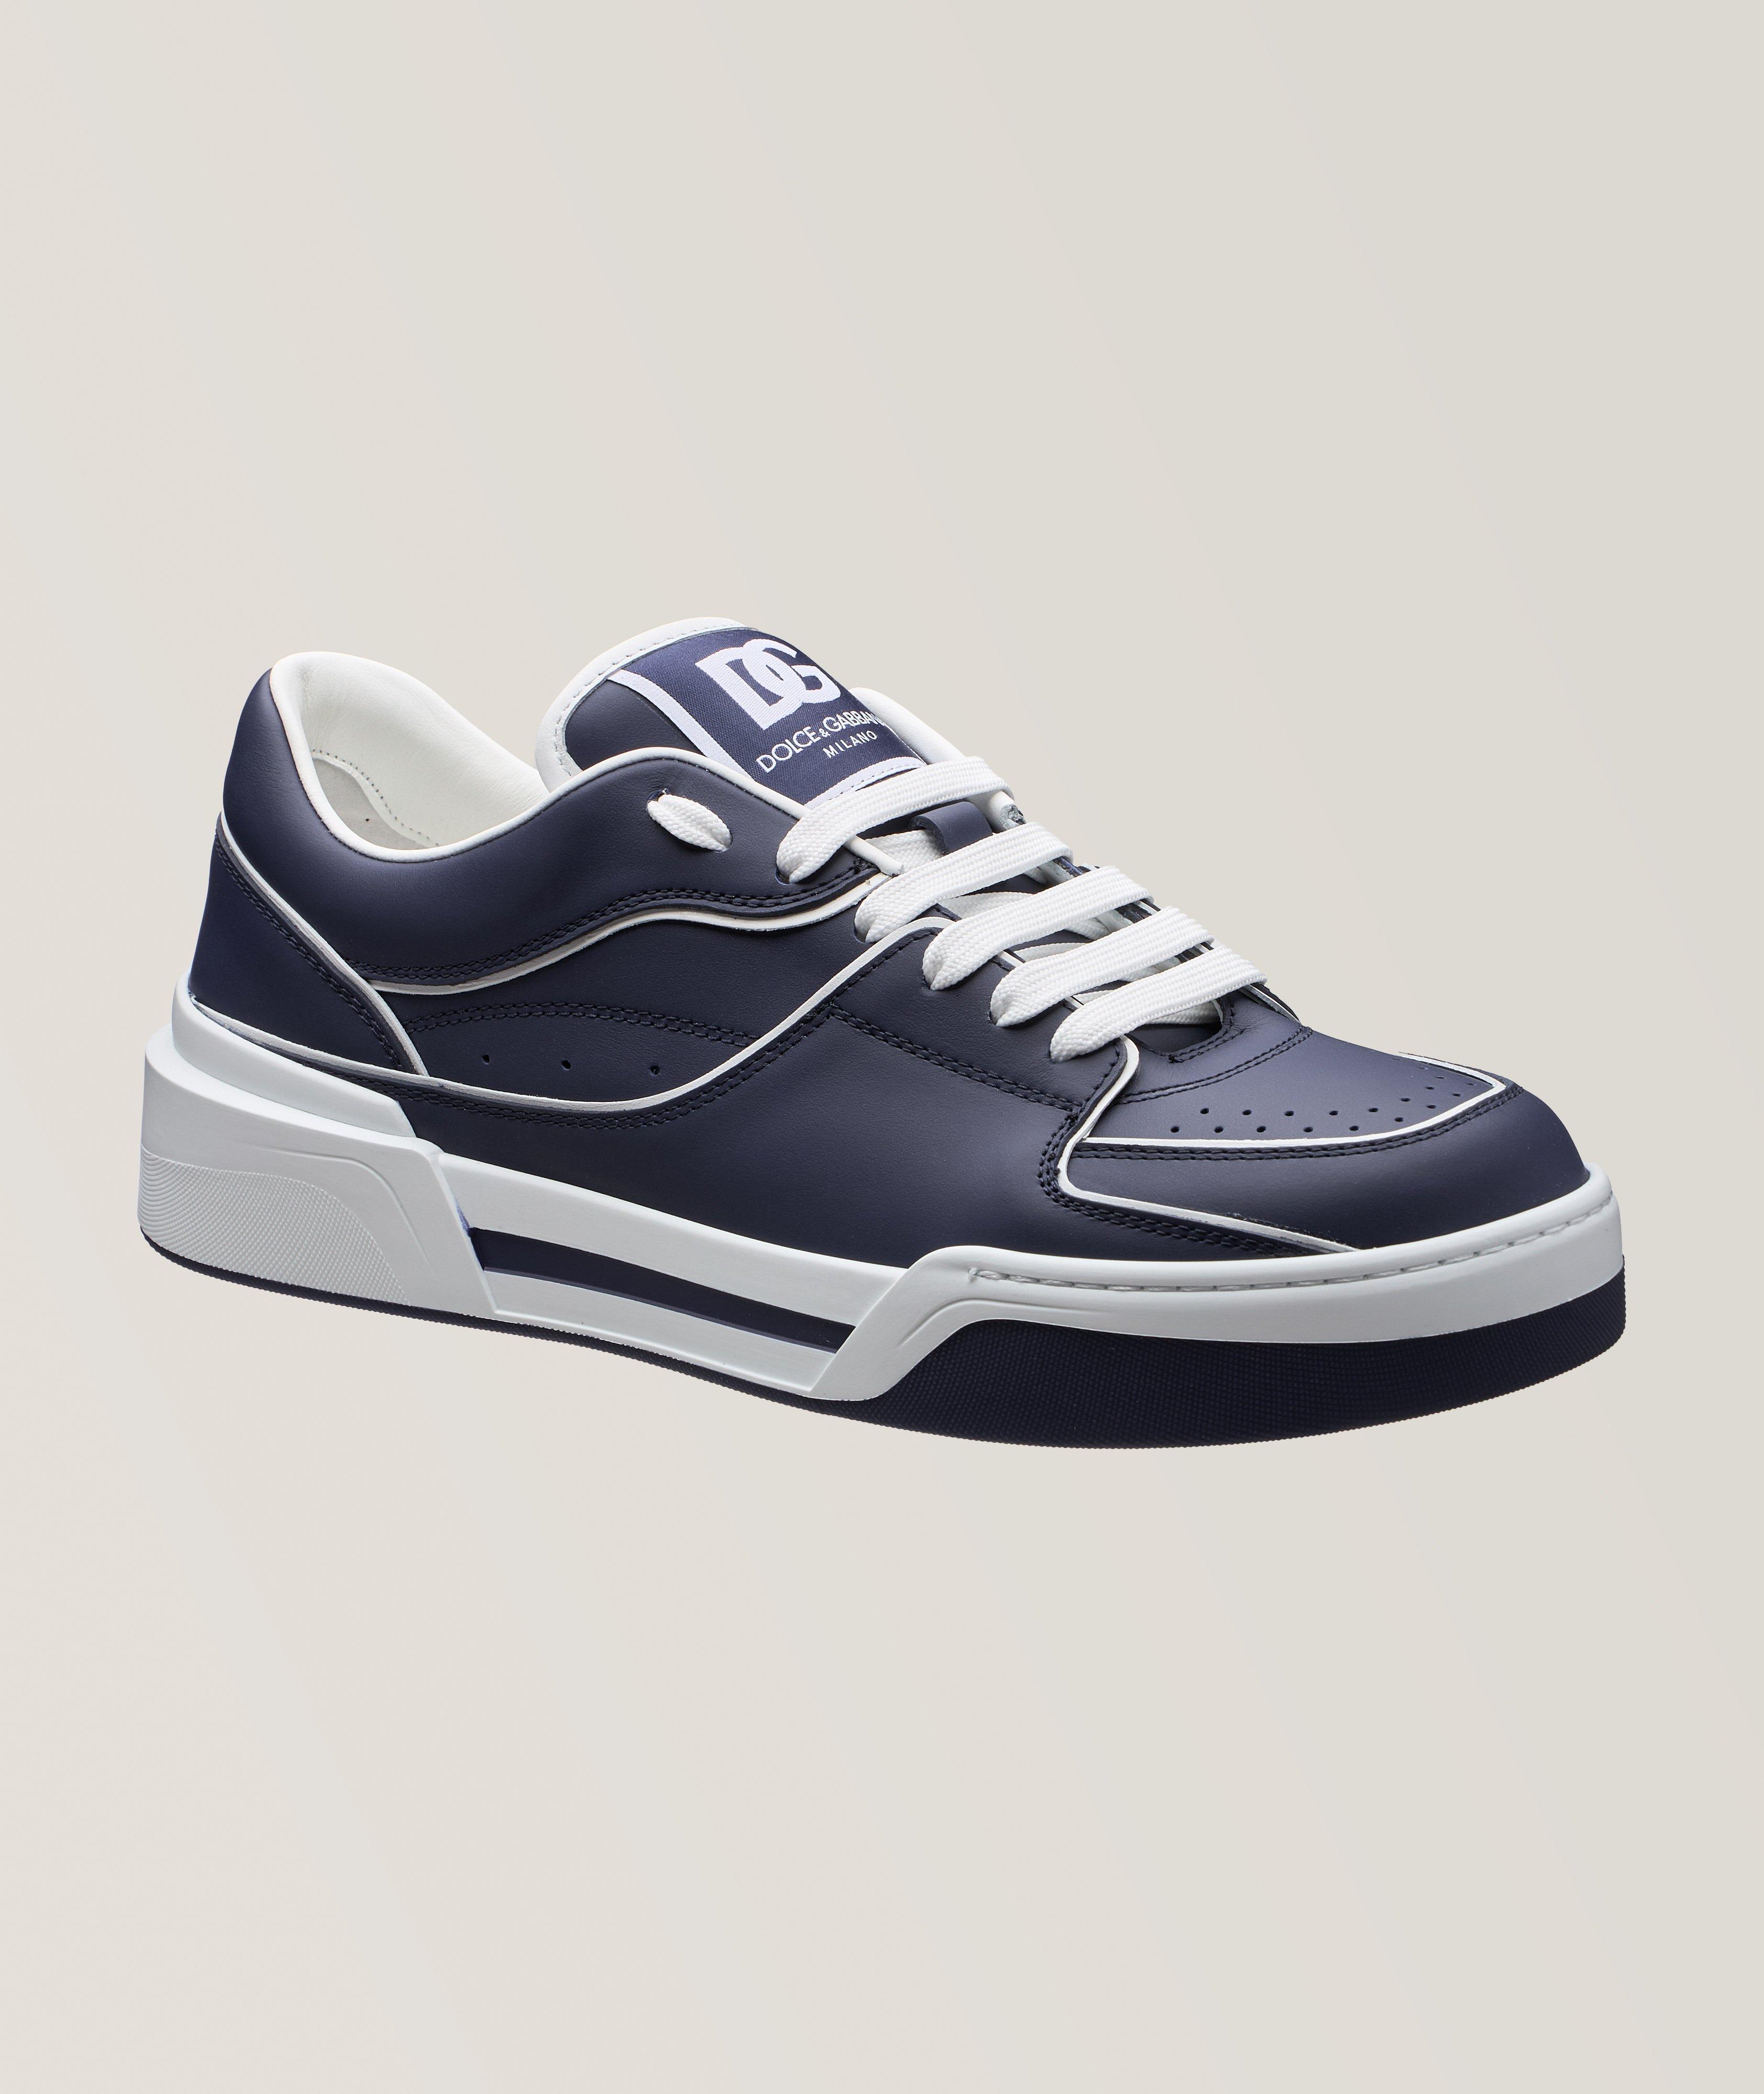 New Roma Leather Sneakers image 0